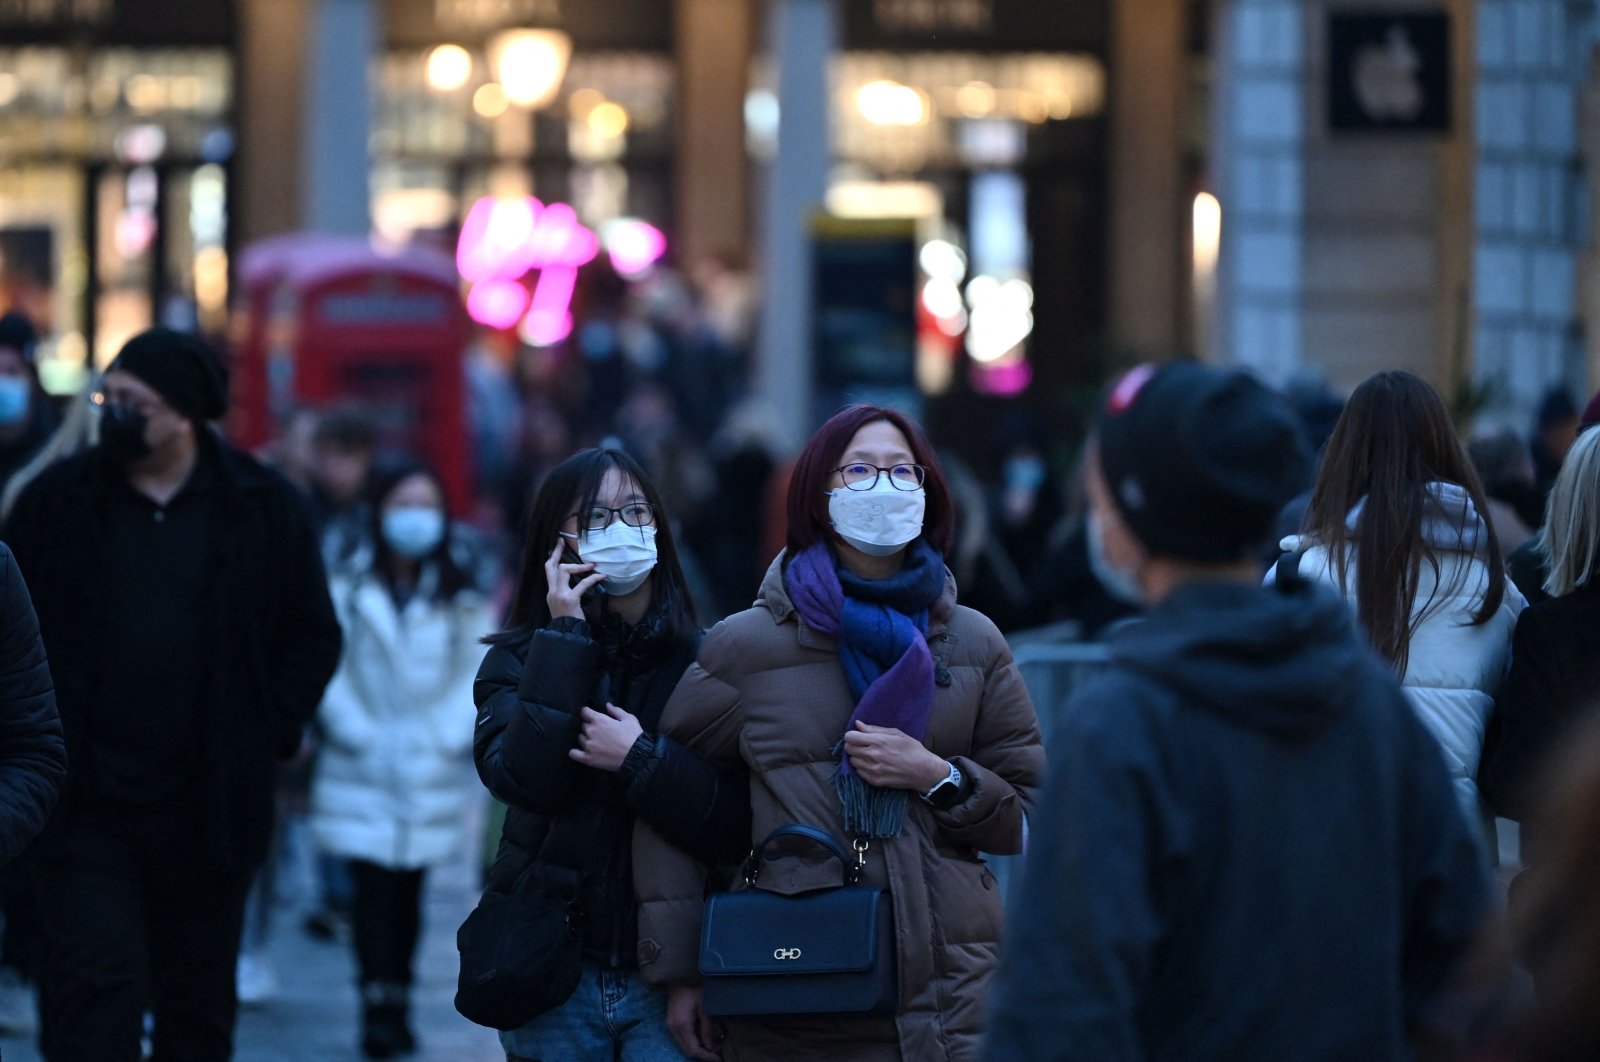 Shoppers wearing face coverings to combat the spread of COVID-19, pass through the Covent Garden area of London on Dec. 21, 2021. (AFP Photo)